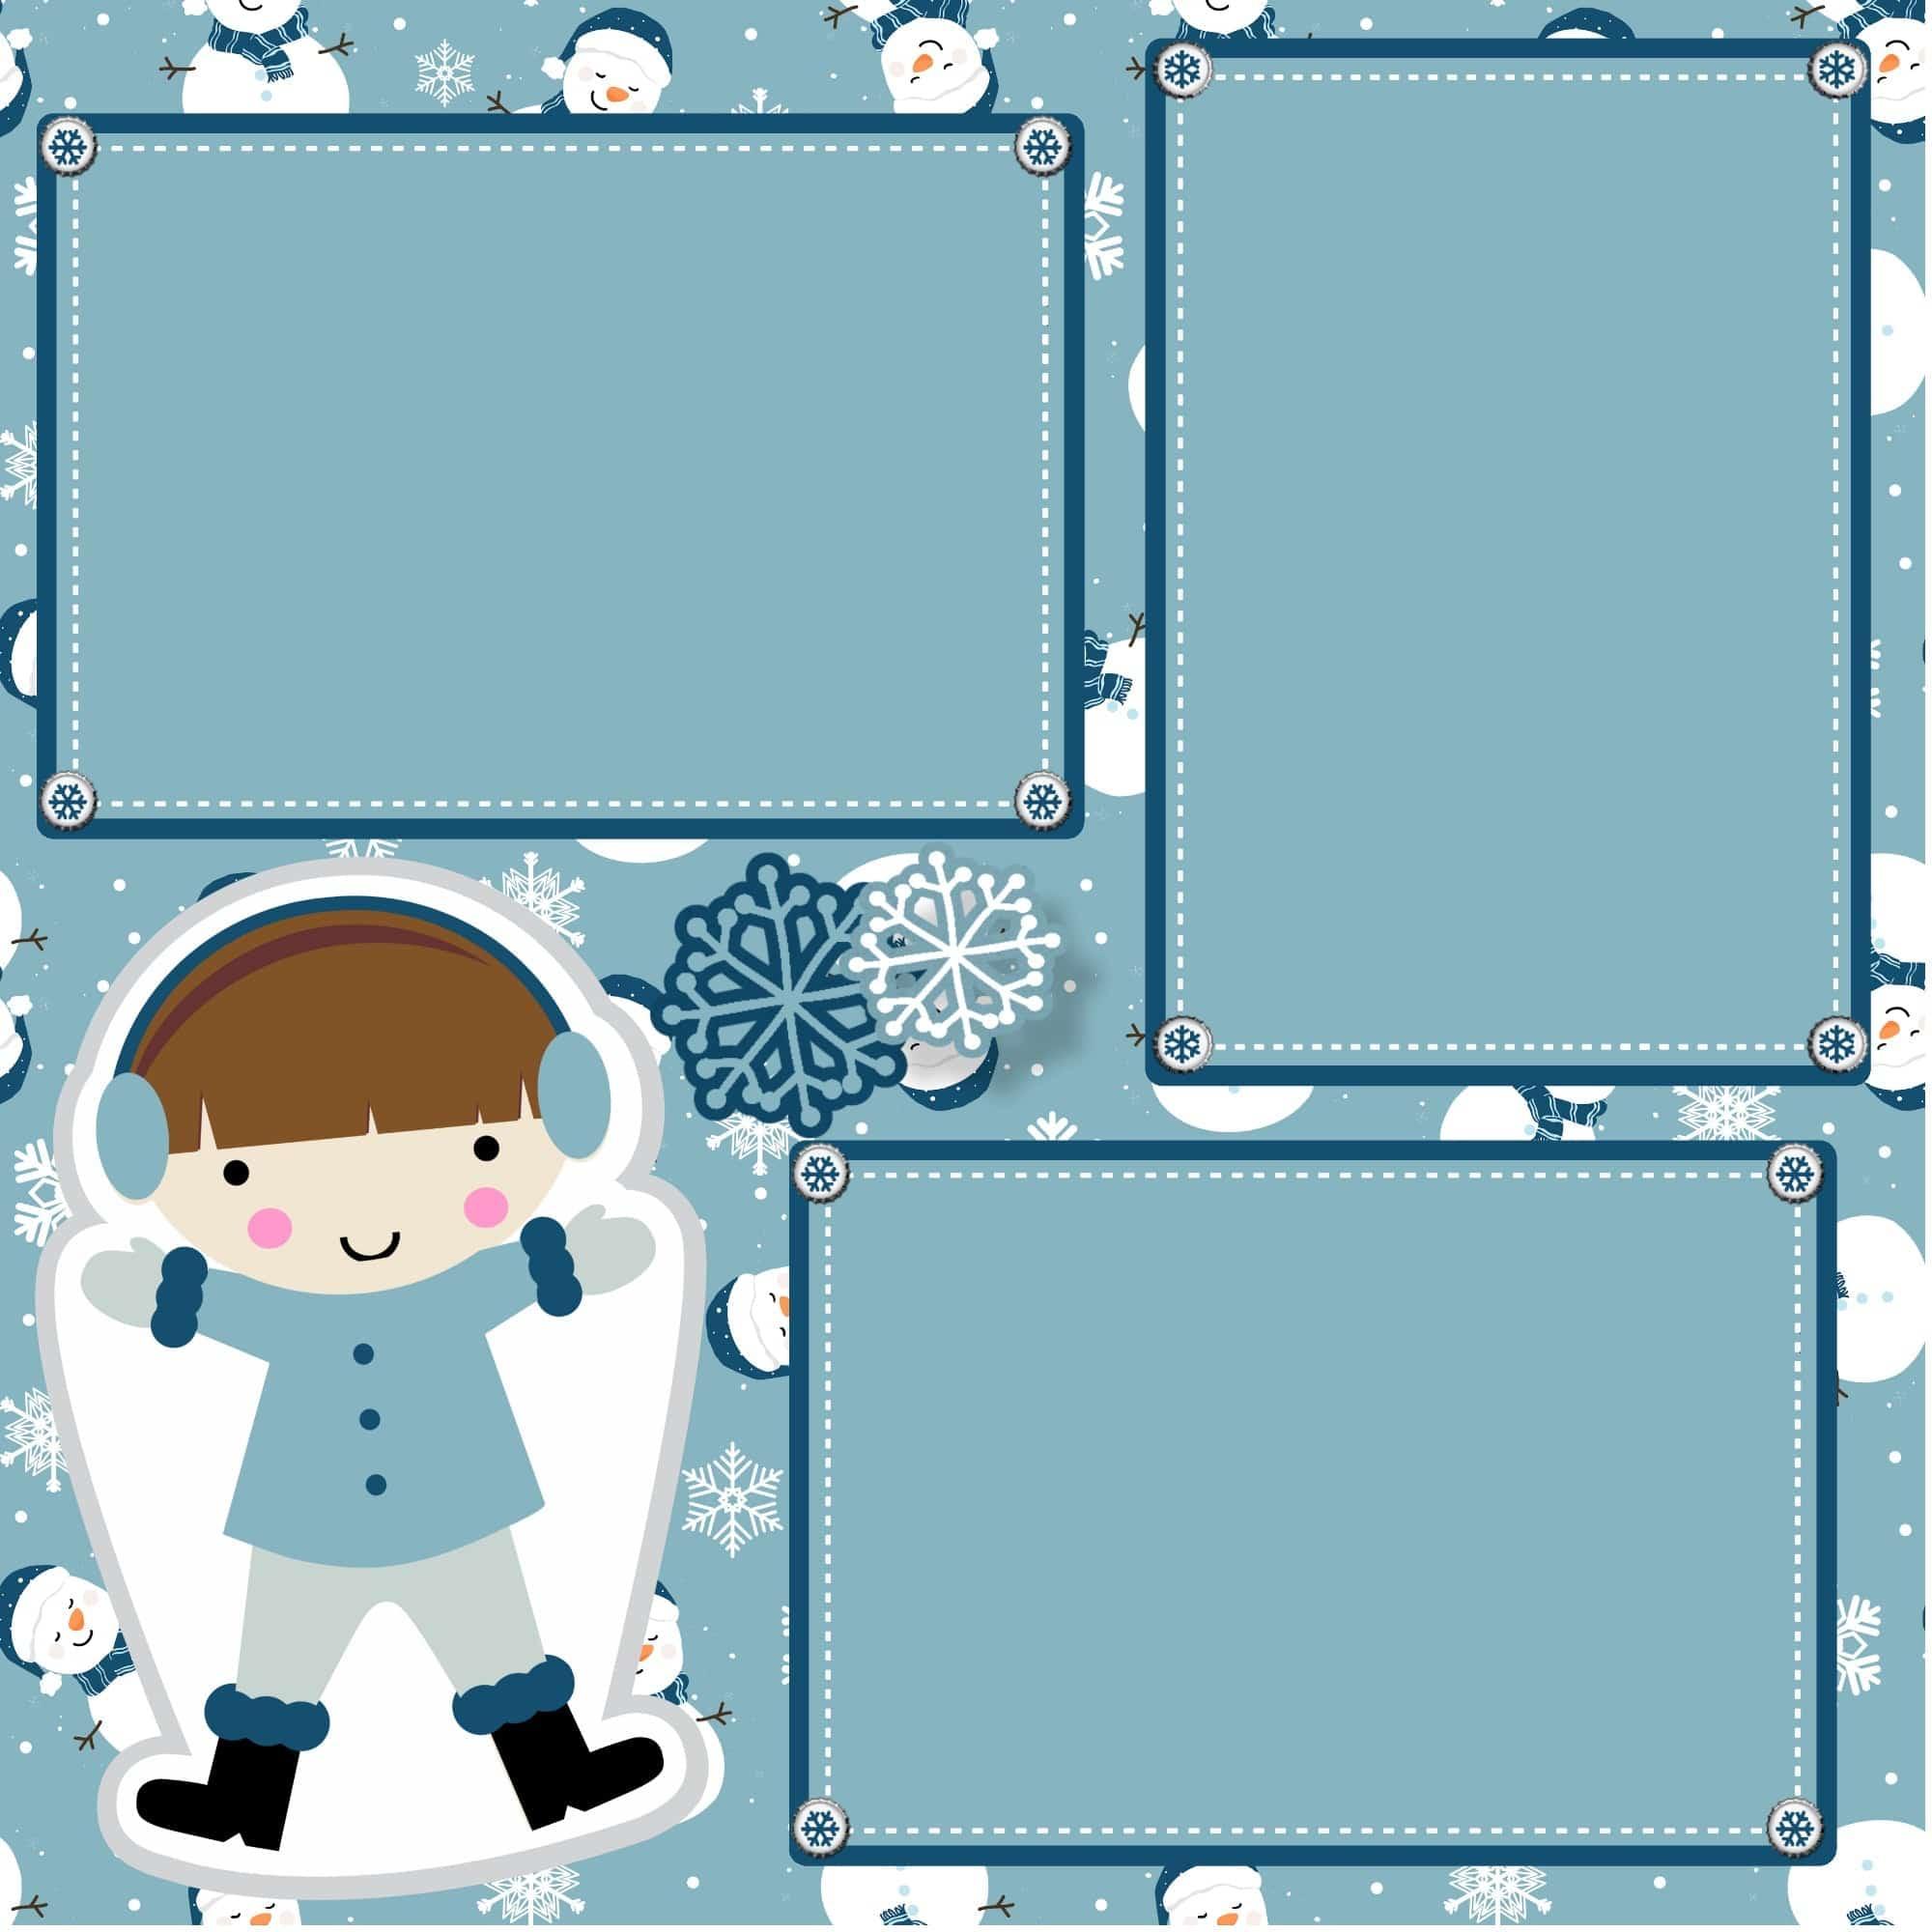 Snow Angel Boy (2) - 12 x 12 Premade, Printed Scrapbook Pages by SSC Designs - Scrapbook Supply Companies